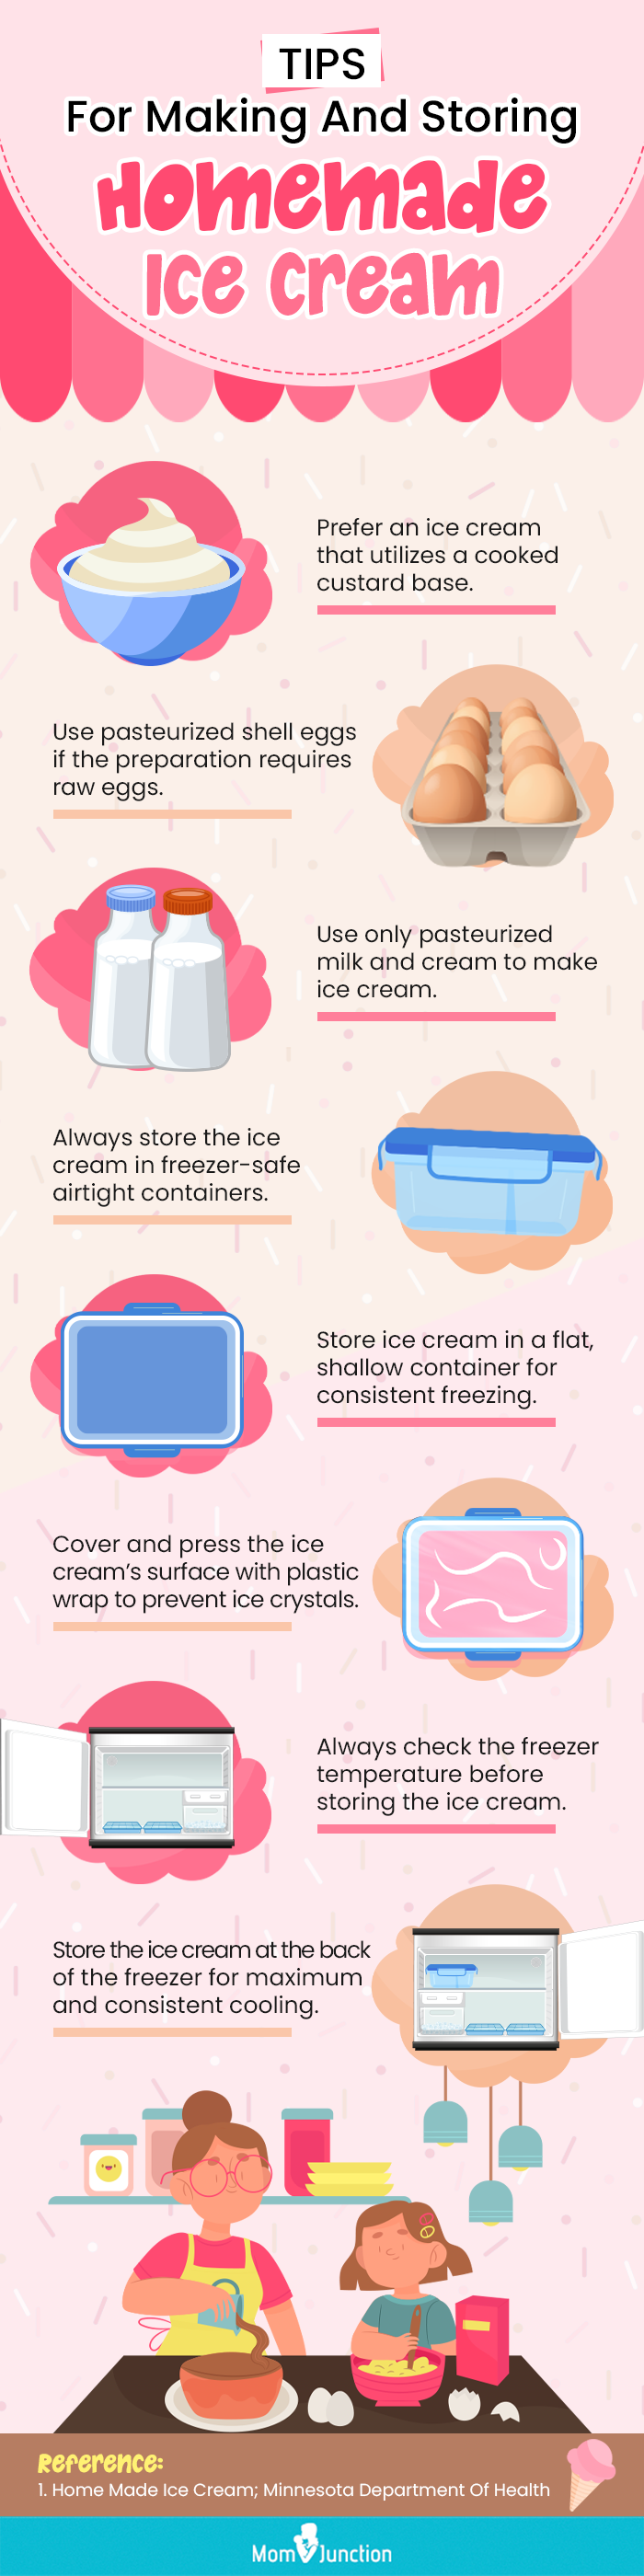 https://www.momjunction.com/wp-content/uploads/2021/03/Tips-For-Making-And-Storing-Homemade-Ice-Cream.png